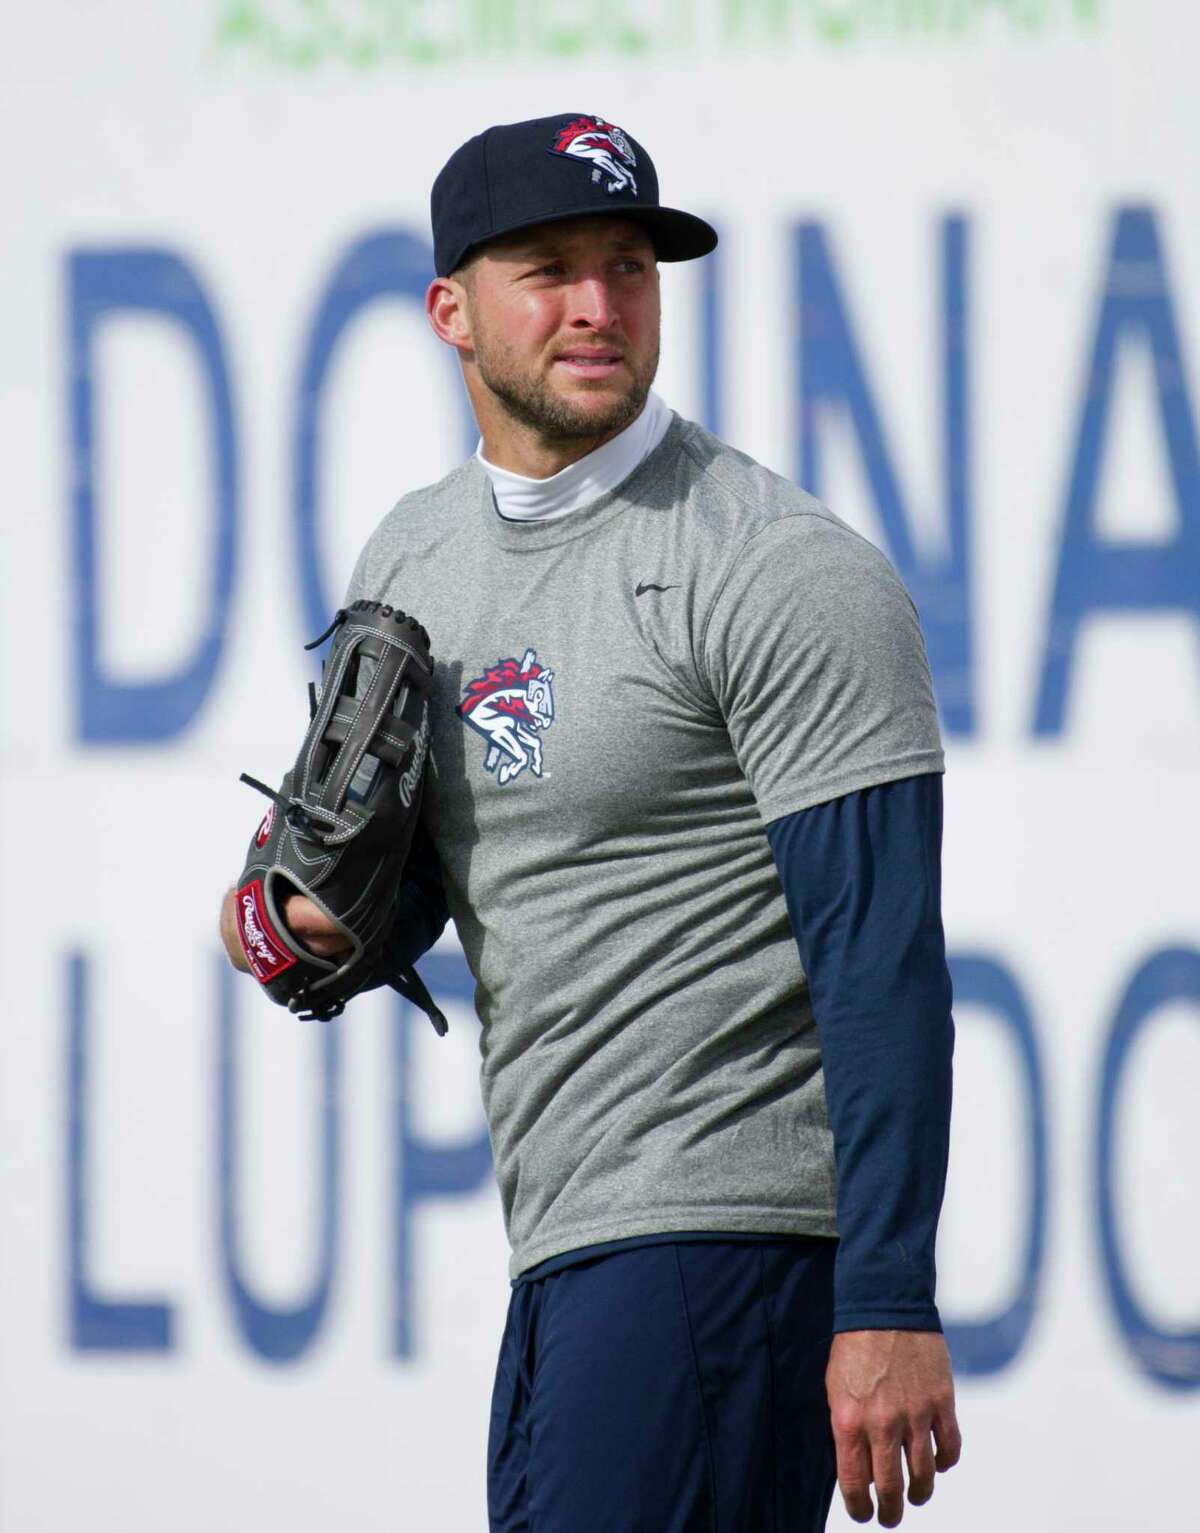 New York Mets outfielder Tim Tebow warms up before his debut with the Binghamton Rumble Ponies minor league baseball team as they host the Portland Sea Dogs, Thursday, April 5, 2018, at NYSEG Stadium in Binghamton, N.Y.